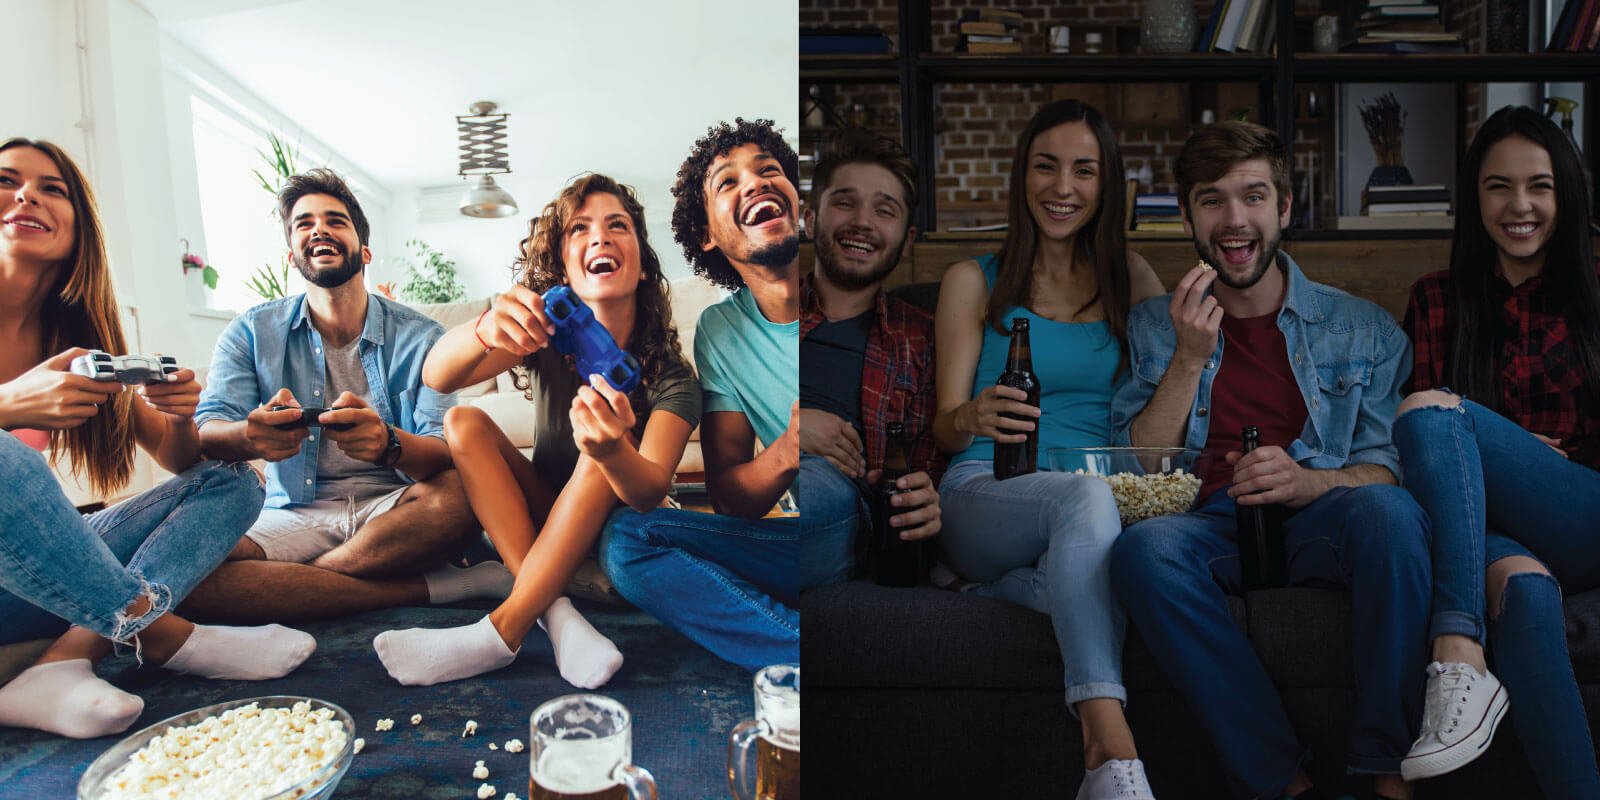 a comparison picture between day time party and movie night gathering